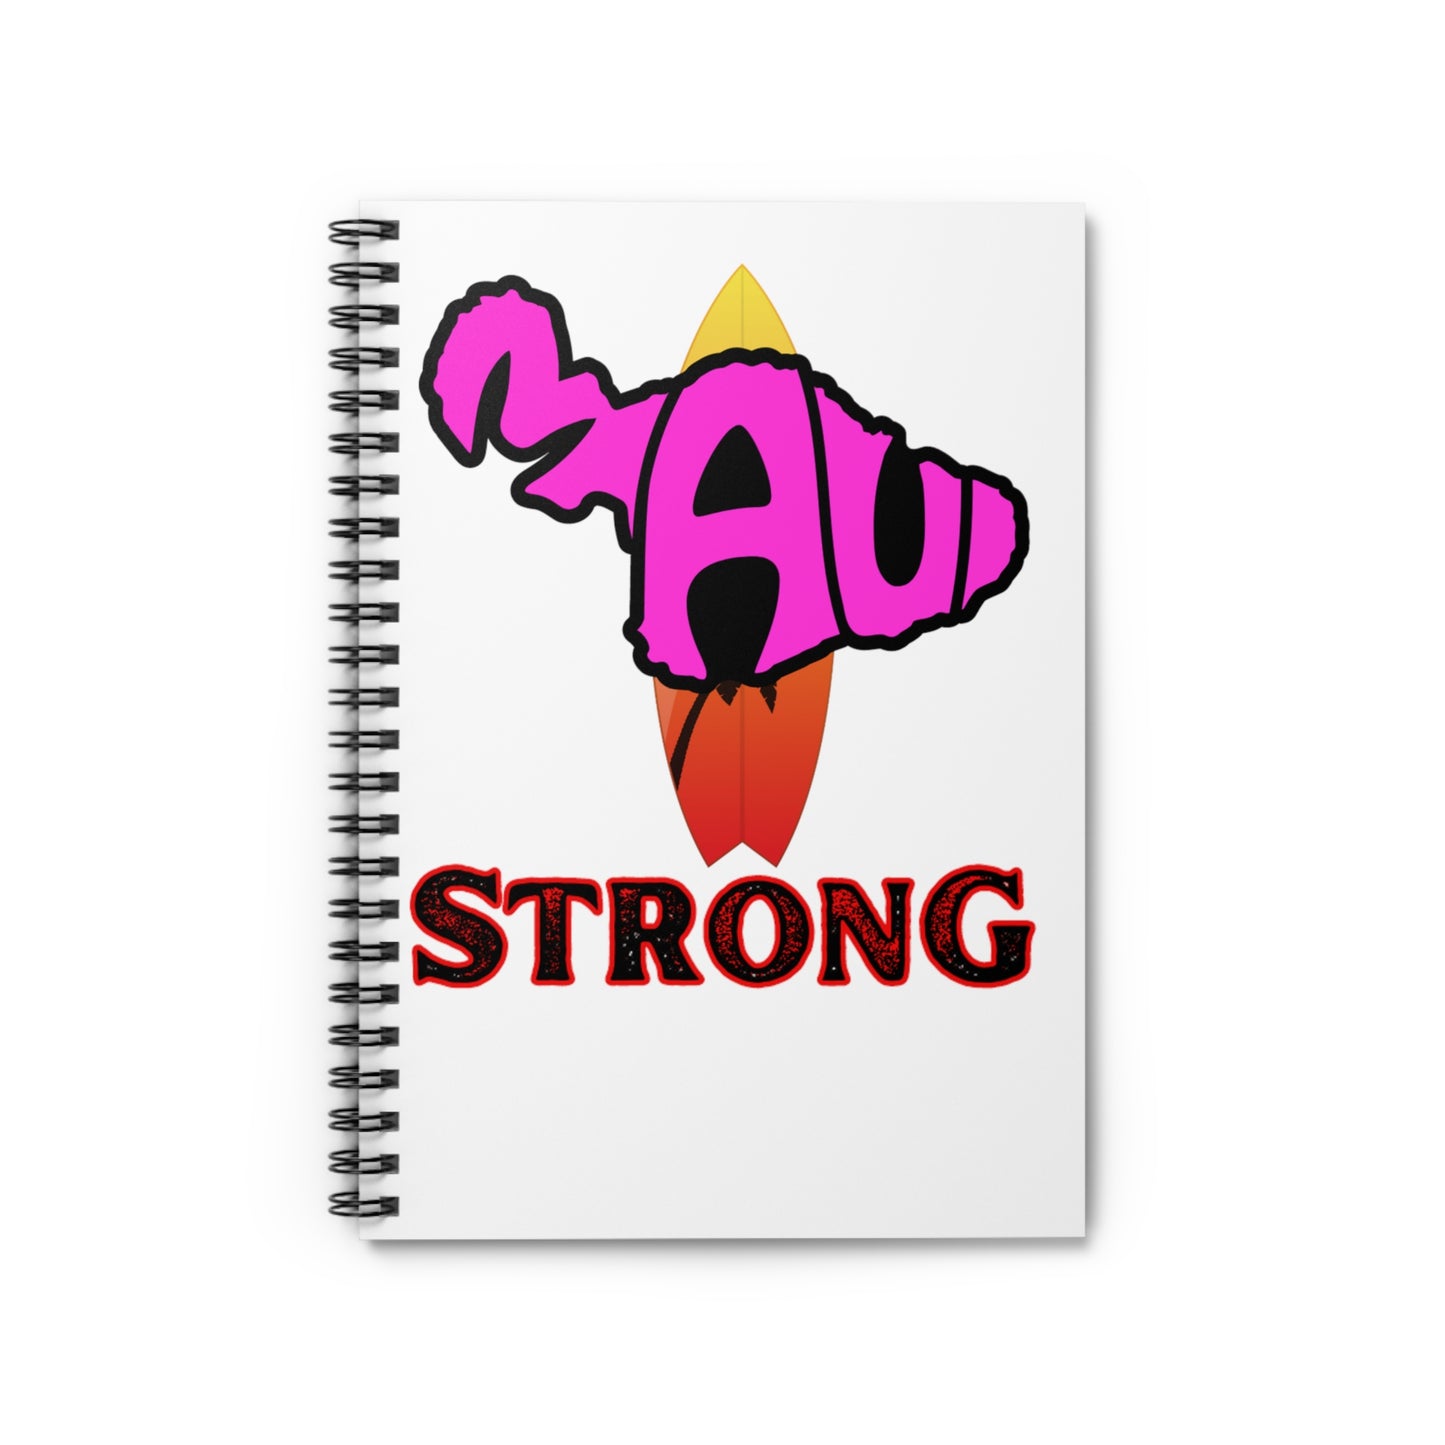 Maui Strong Spiral Notebook - Ruled Line